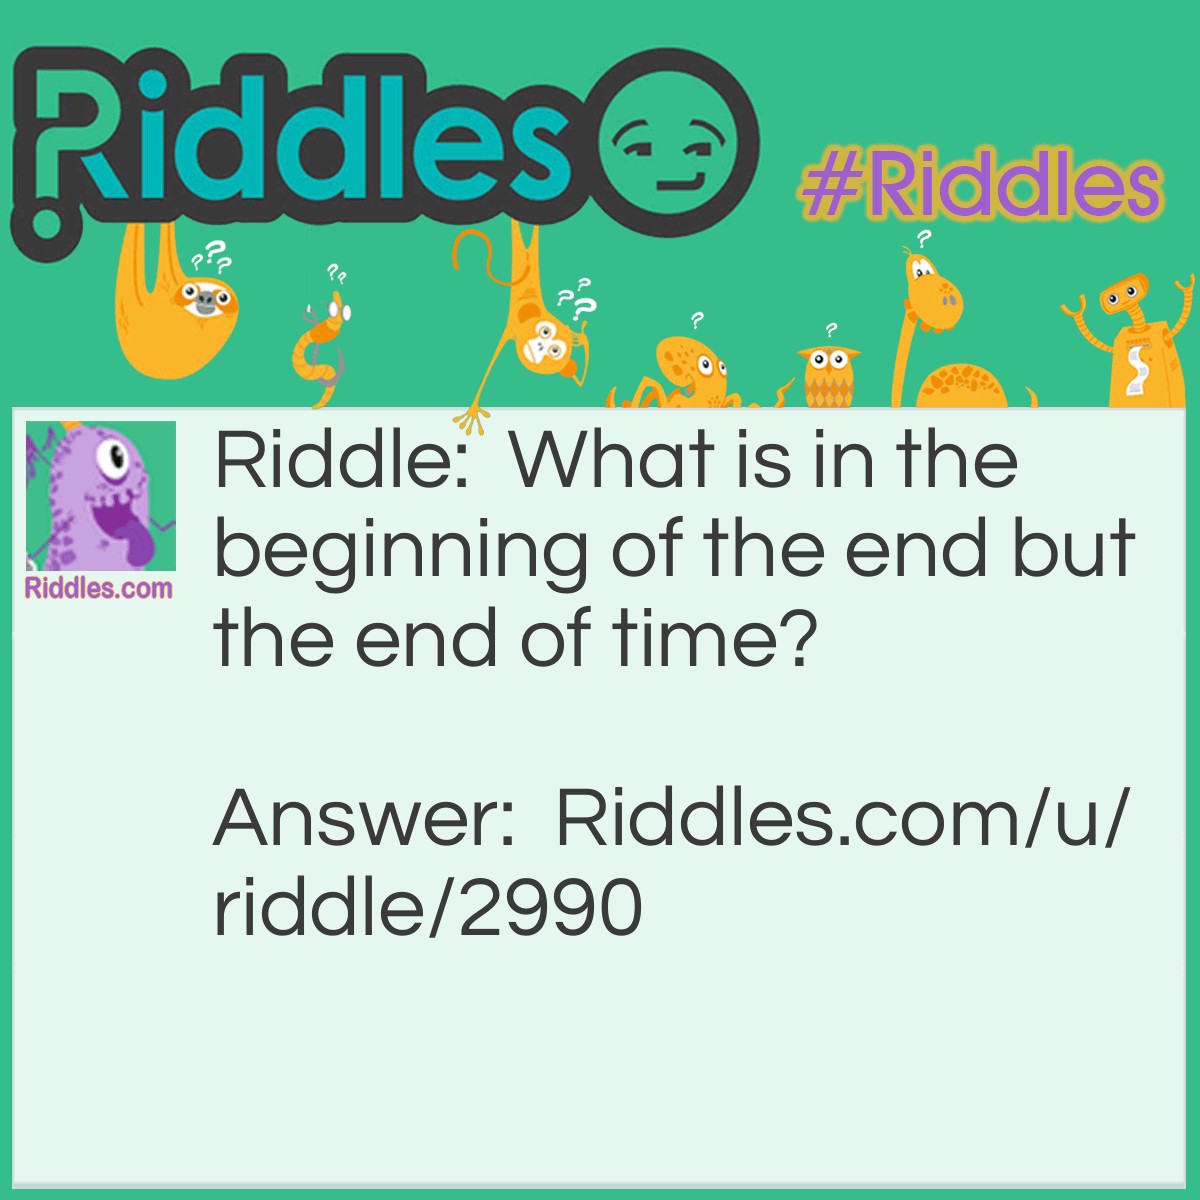 Riddle: What is in the beginning of the end but the end of time? Answer: The letter E.